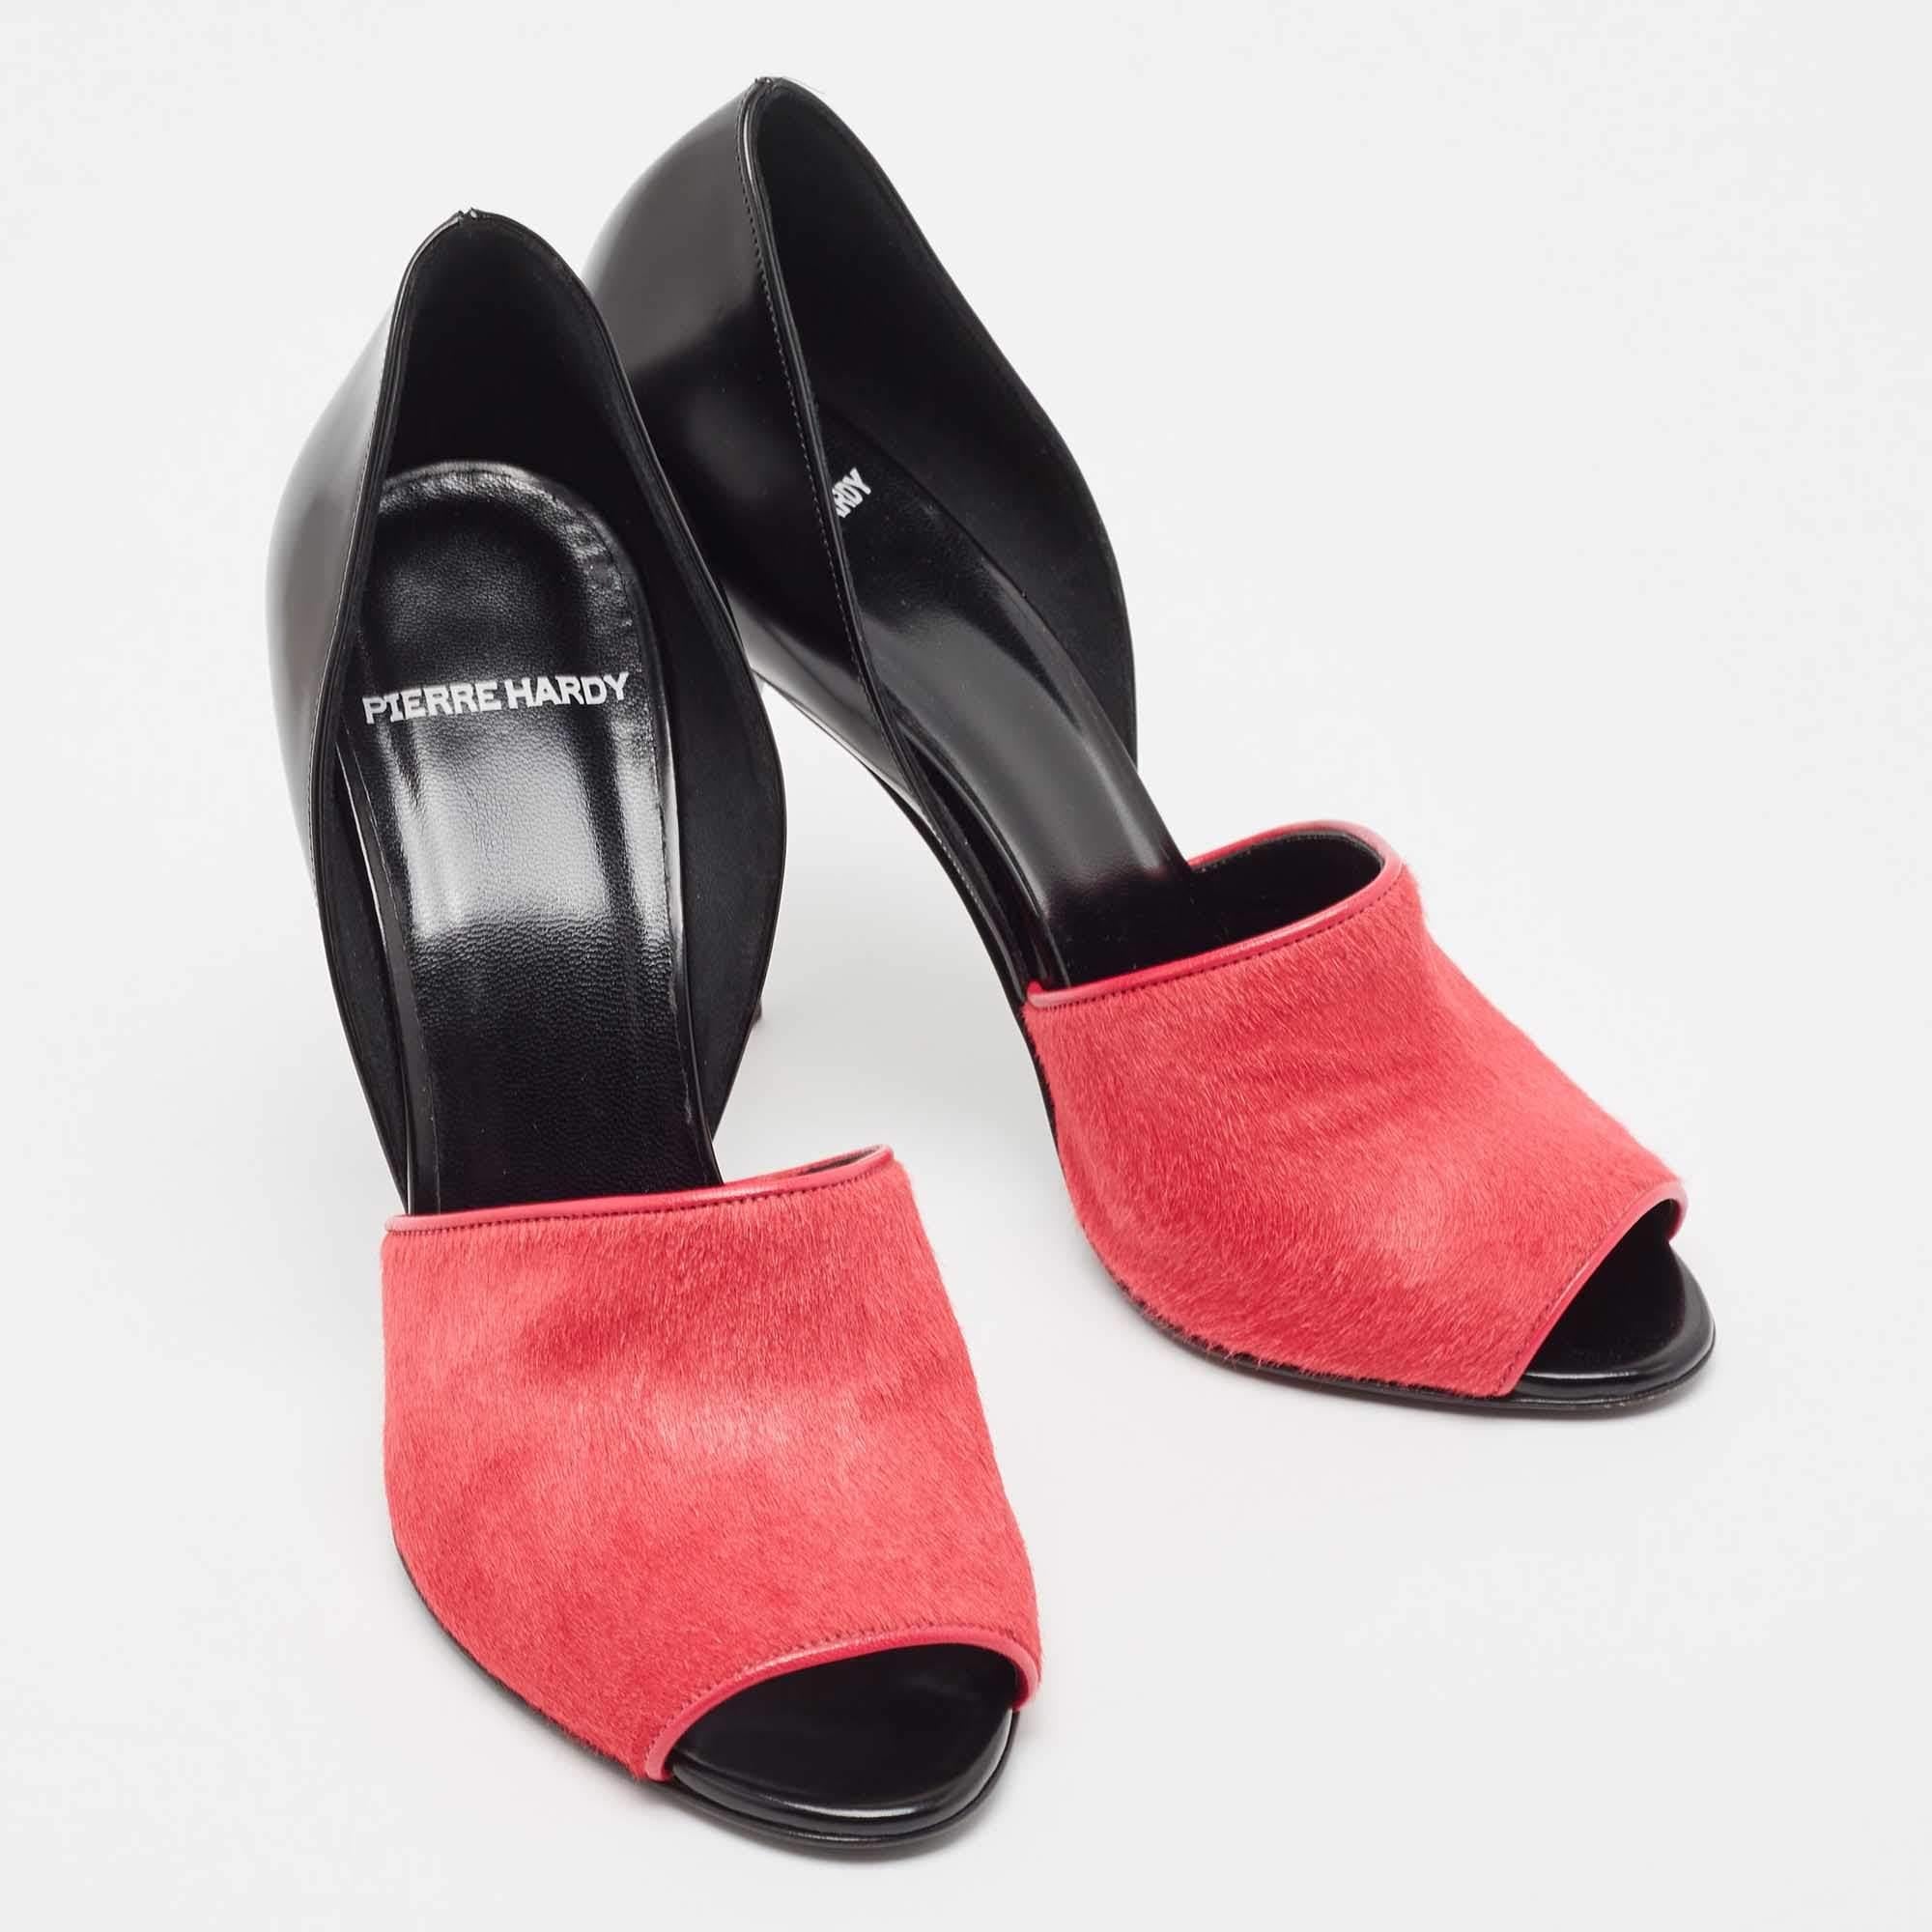 Pierre Hardy Black/Pink Calf Hair Leather and Calf Hair Open Toe Pumps Size 38 For Sale 2